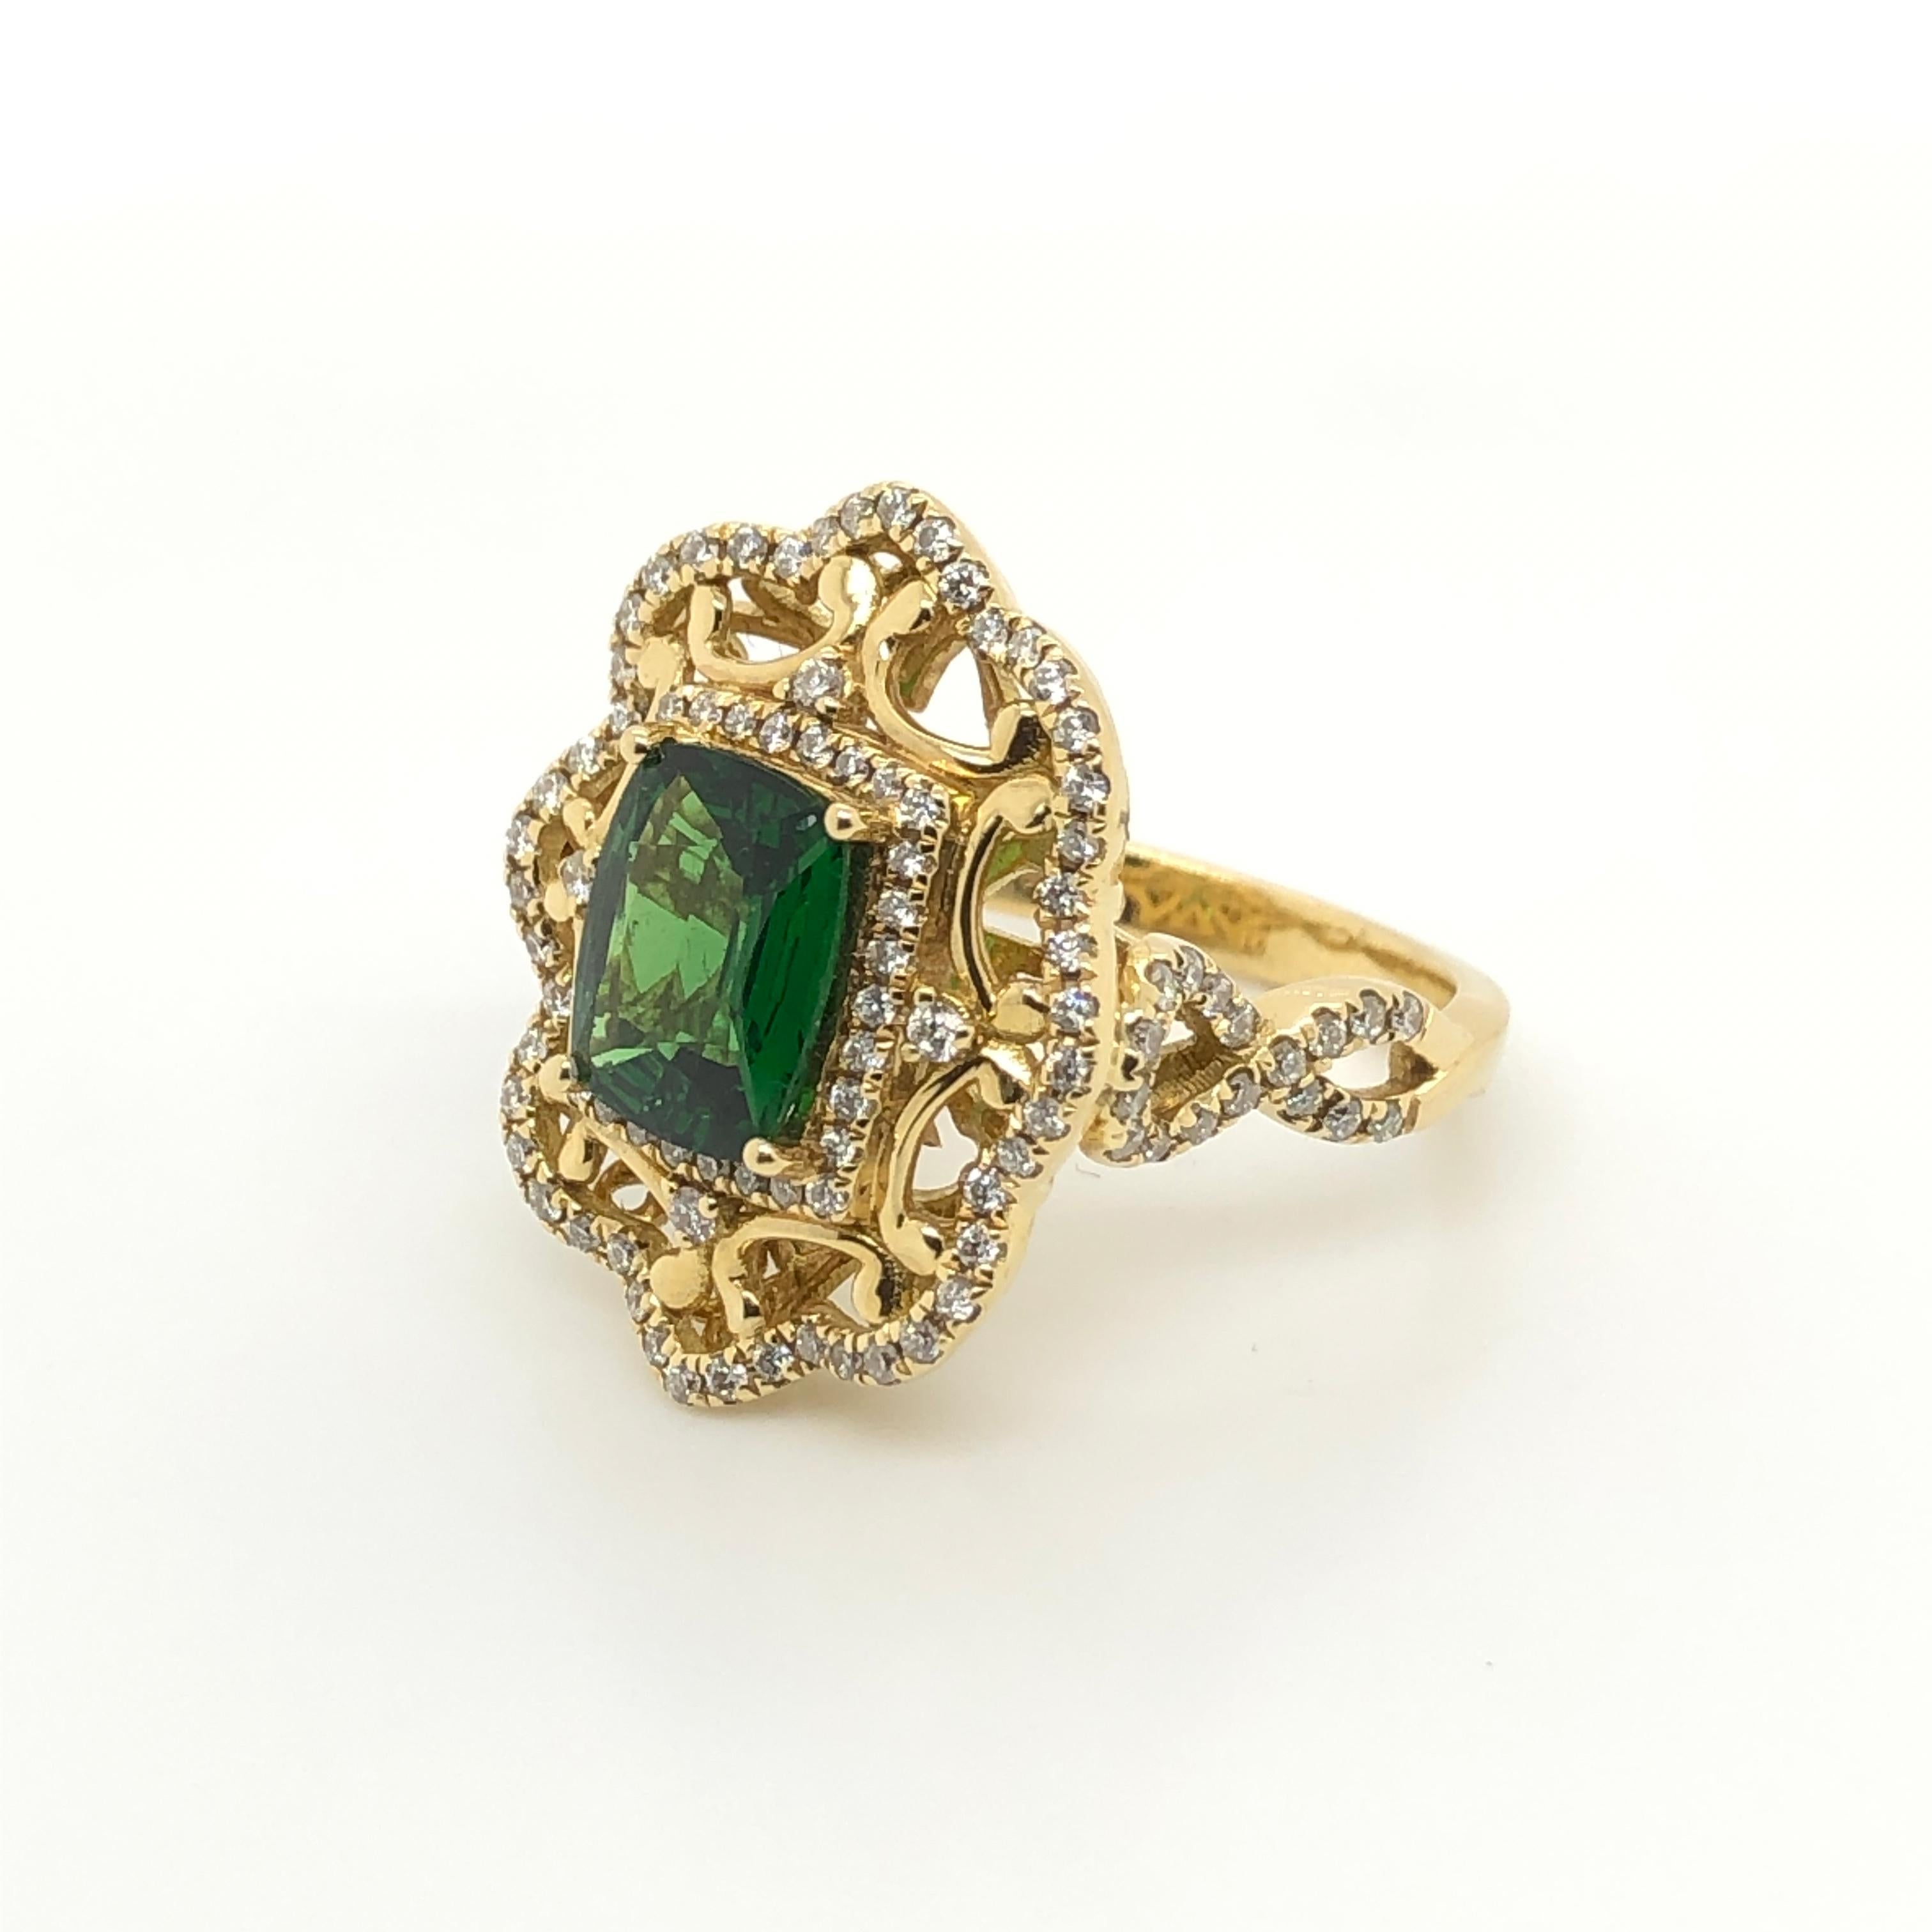 Fresh and lively best describes this 18k yellow gold ring from Le Vian Couture centered with a 2-carat cushion cut Tsavorite nestled within a halo of white diamonds in an elaborate scallop edged setting  accented with Vanilla Diamonds, 1/2 ct t.w.